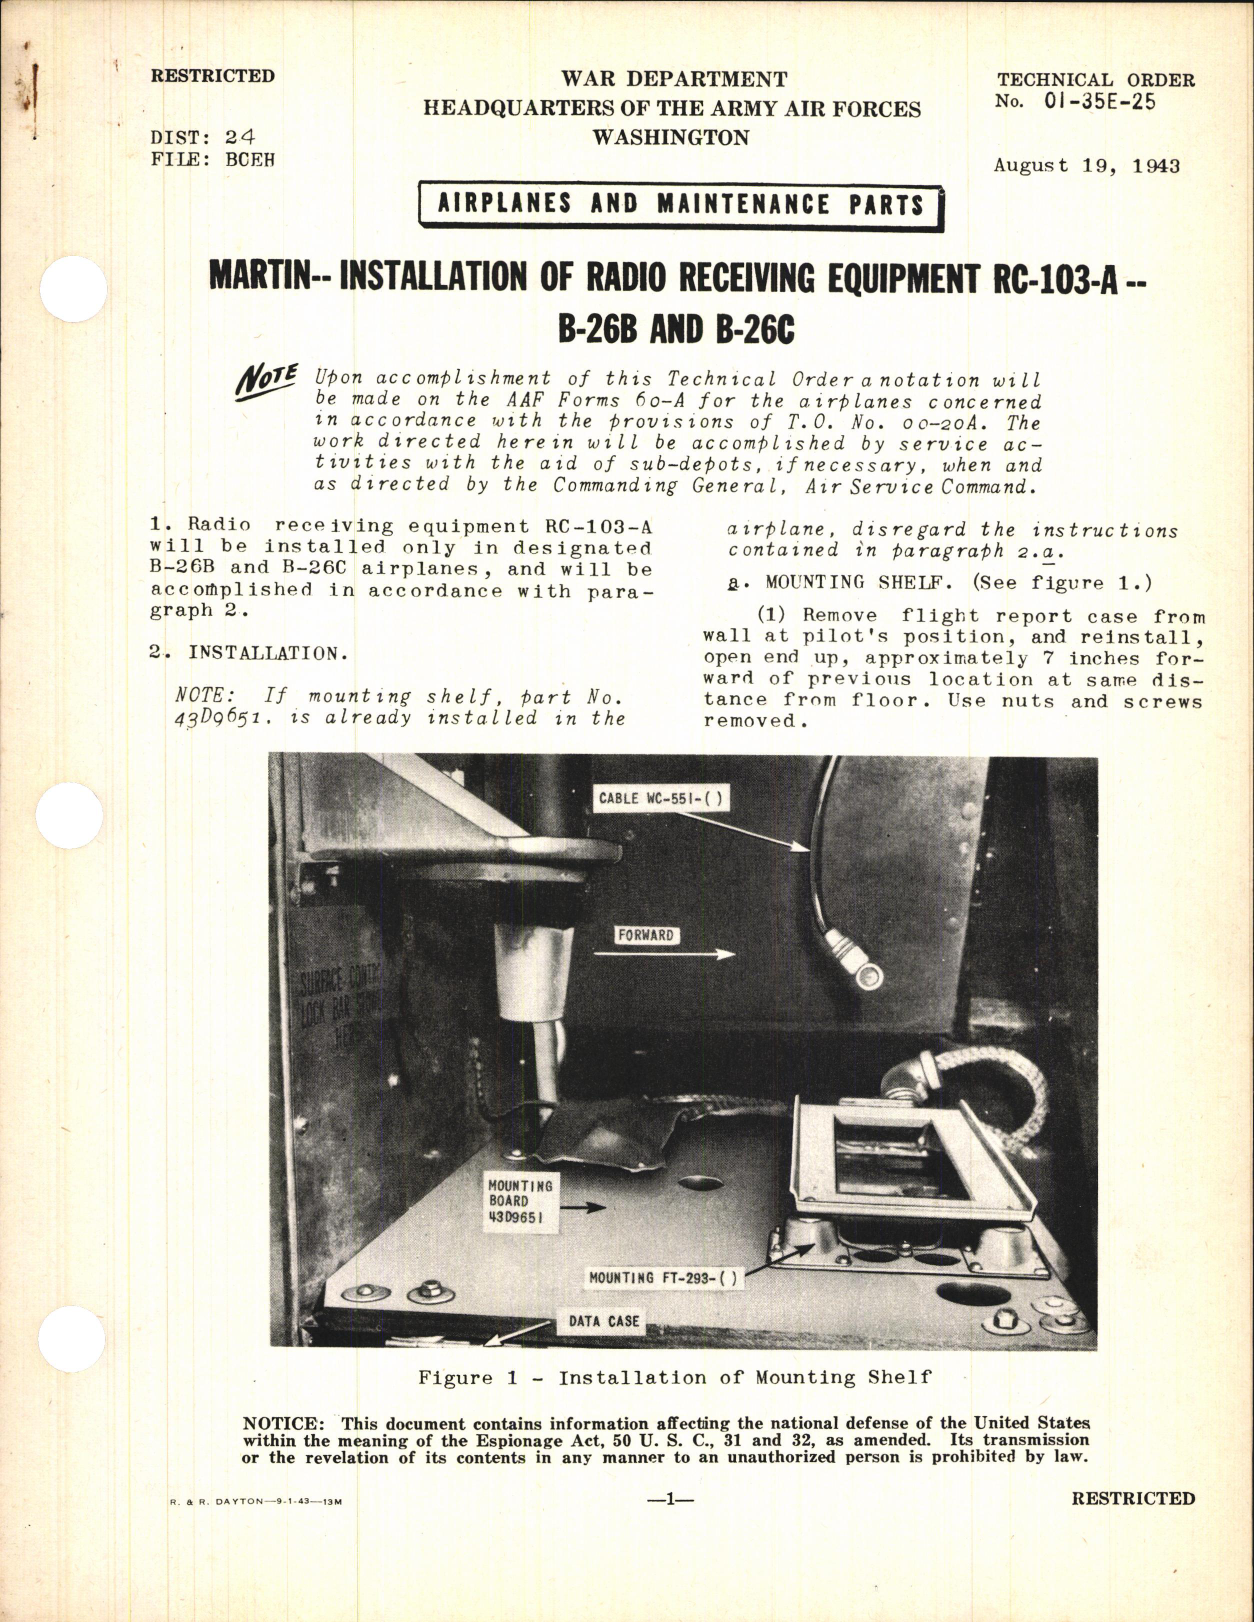 Sample page 1 from AirCorps Library document: Installation of Radio Receiving Equipment RC-103-A for B-26B and B-26C